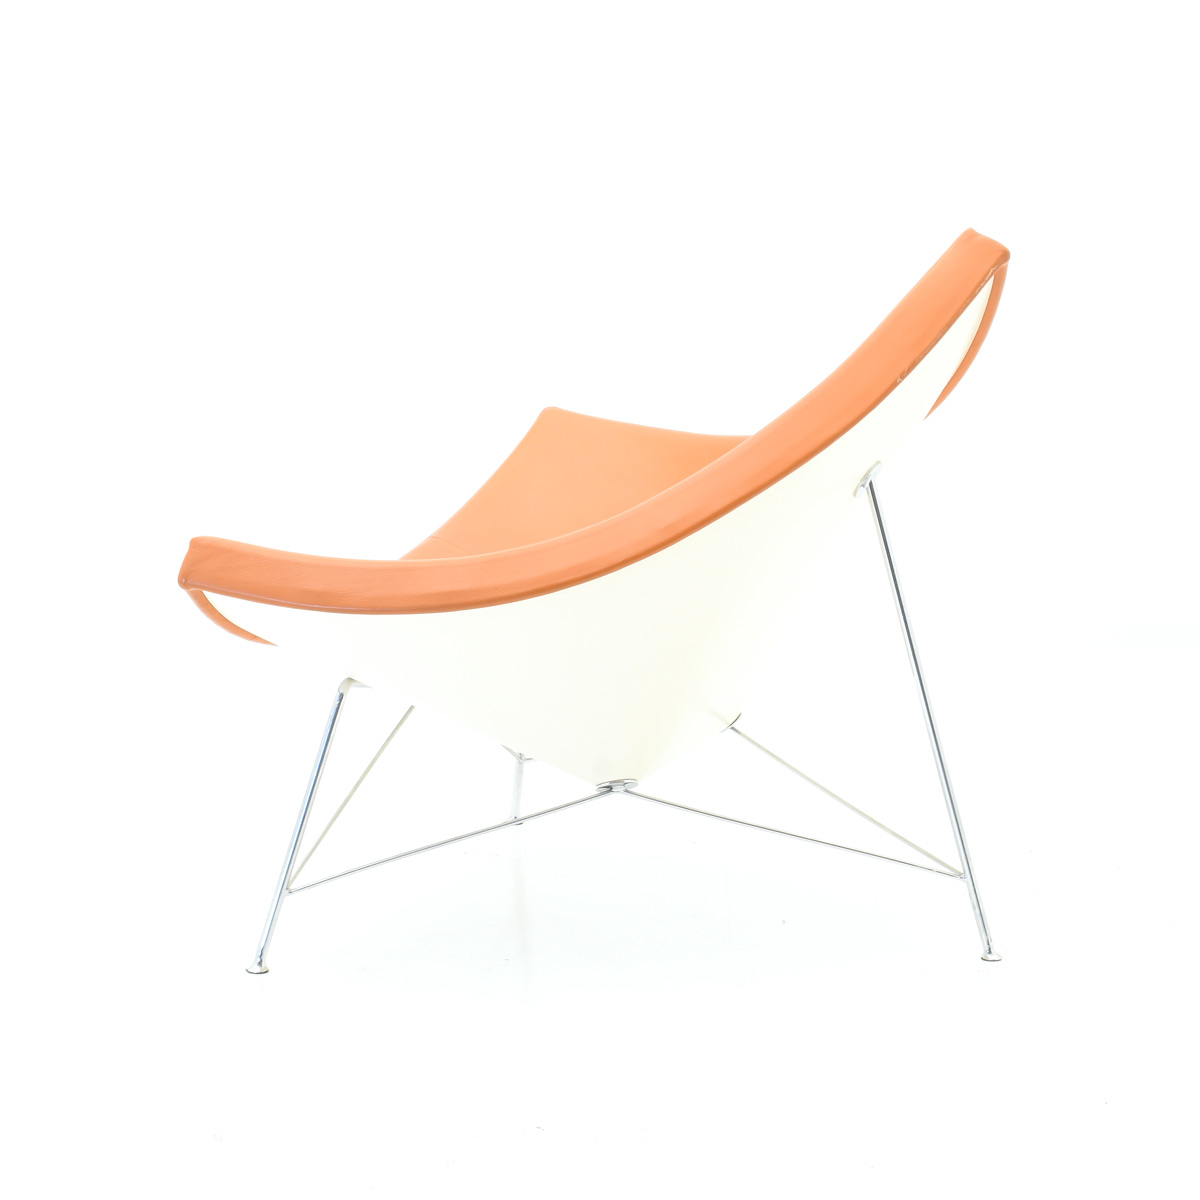 Coconut Chair, George Nelson - 2